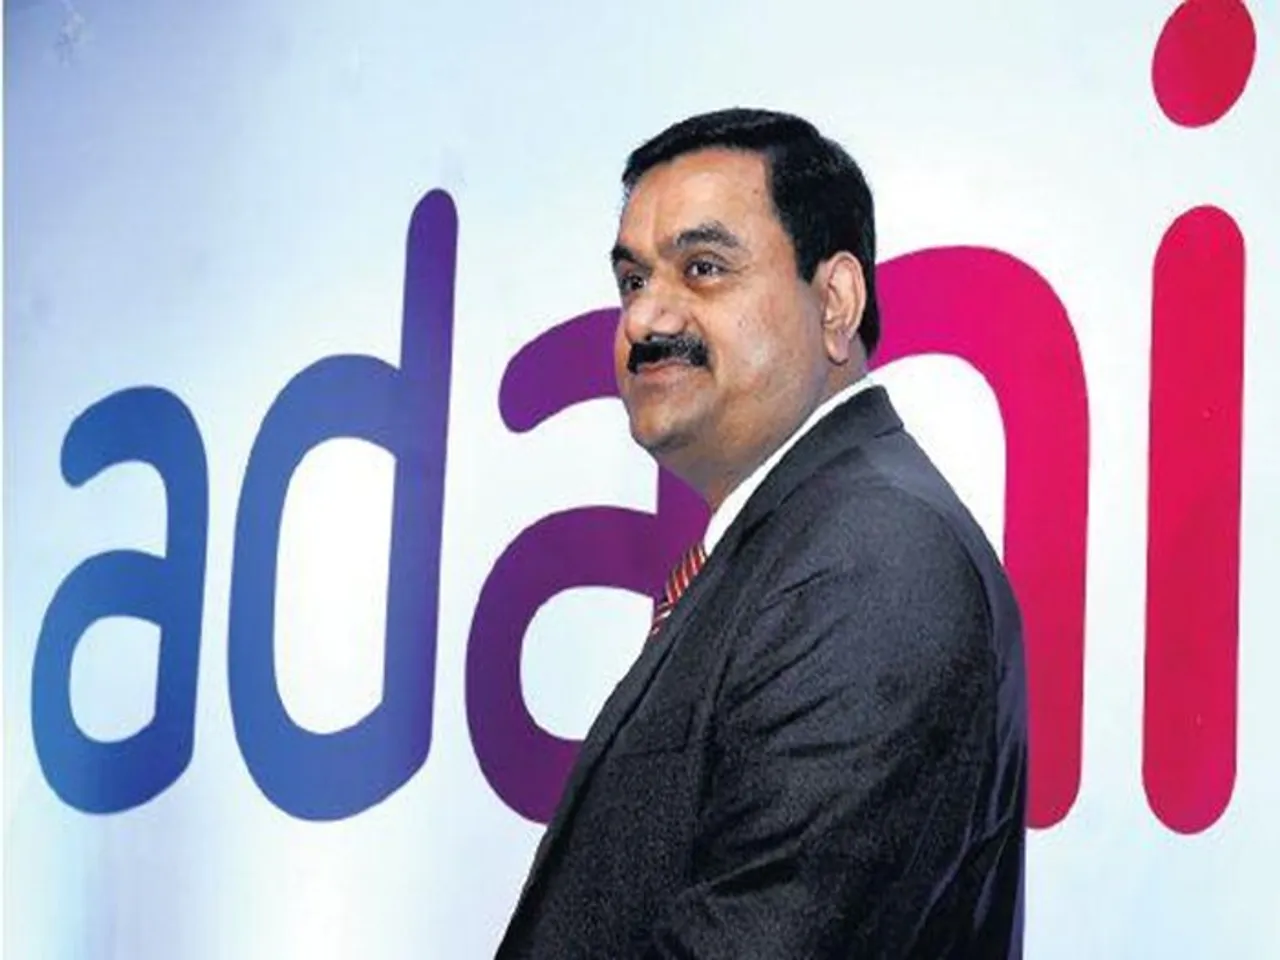 Adani Transmission's Profit Touched Rs 763 Crore in Q4 with 19.4% YoY Growth